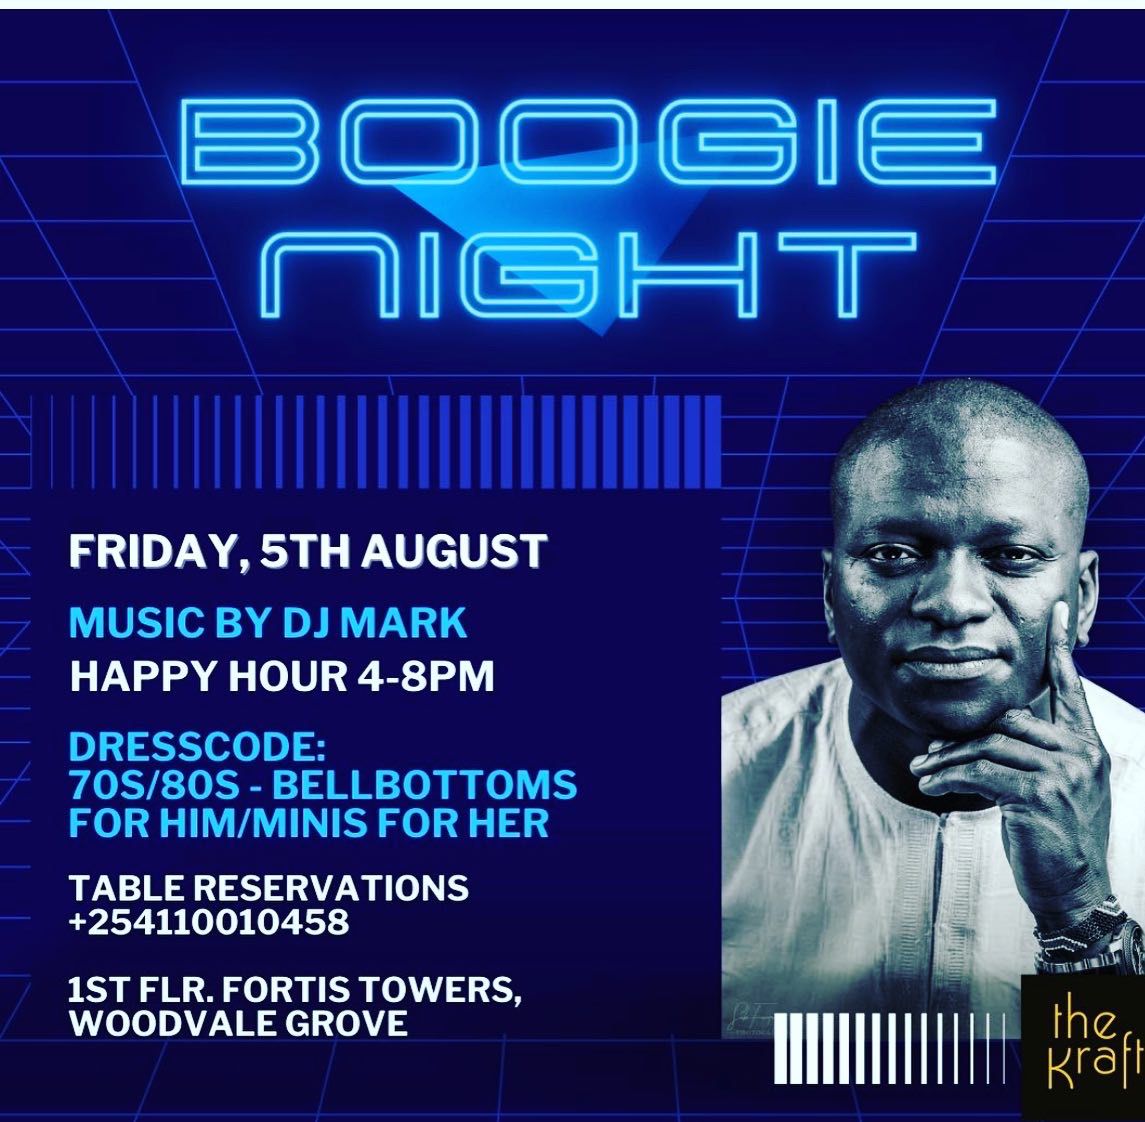 BOOGIE NIGHT FRIDAY 5th AUGUST